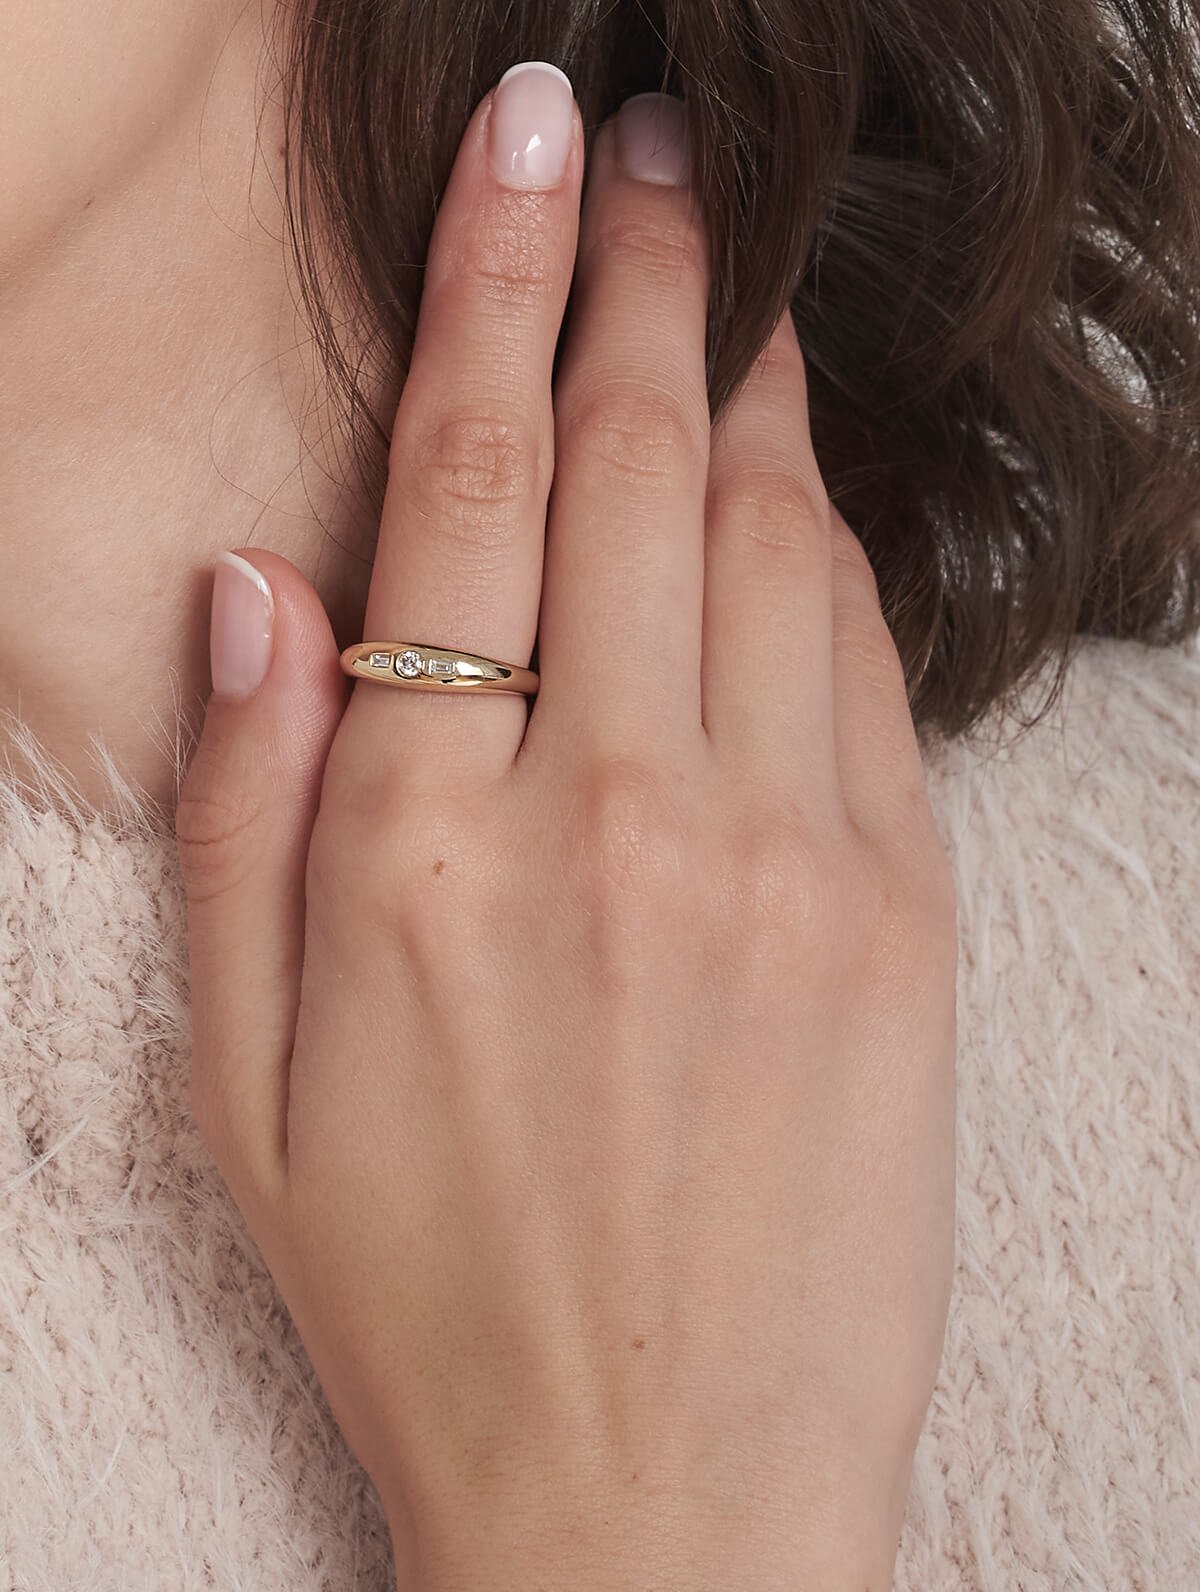 Gold Inlay Diamond and Baguette Ring